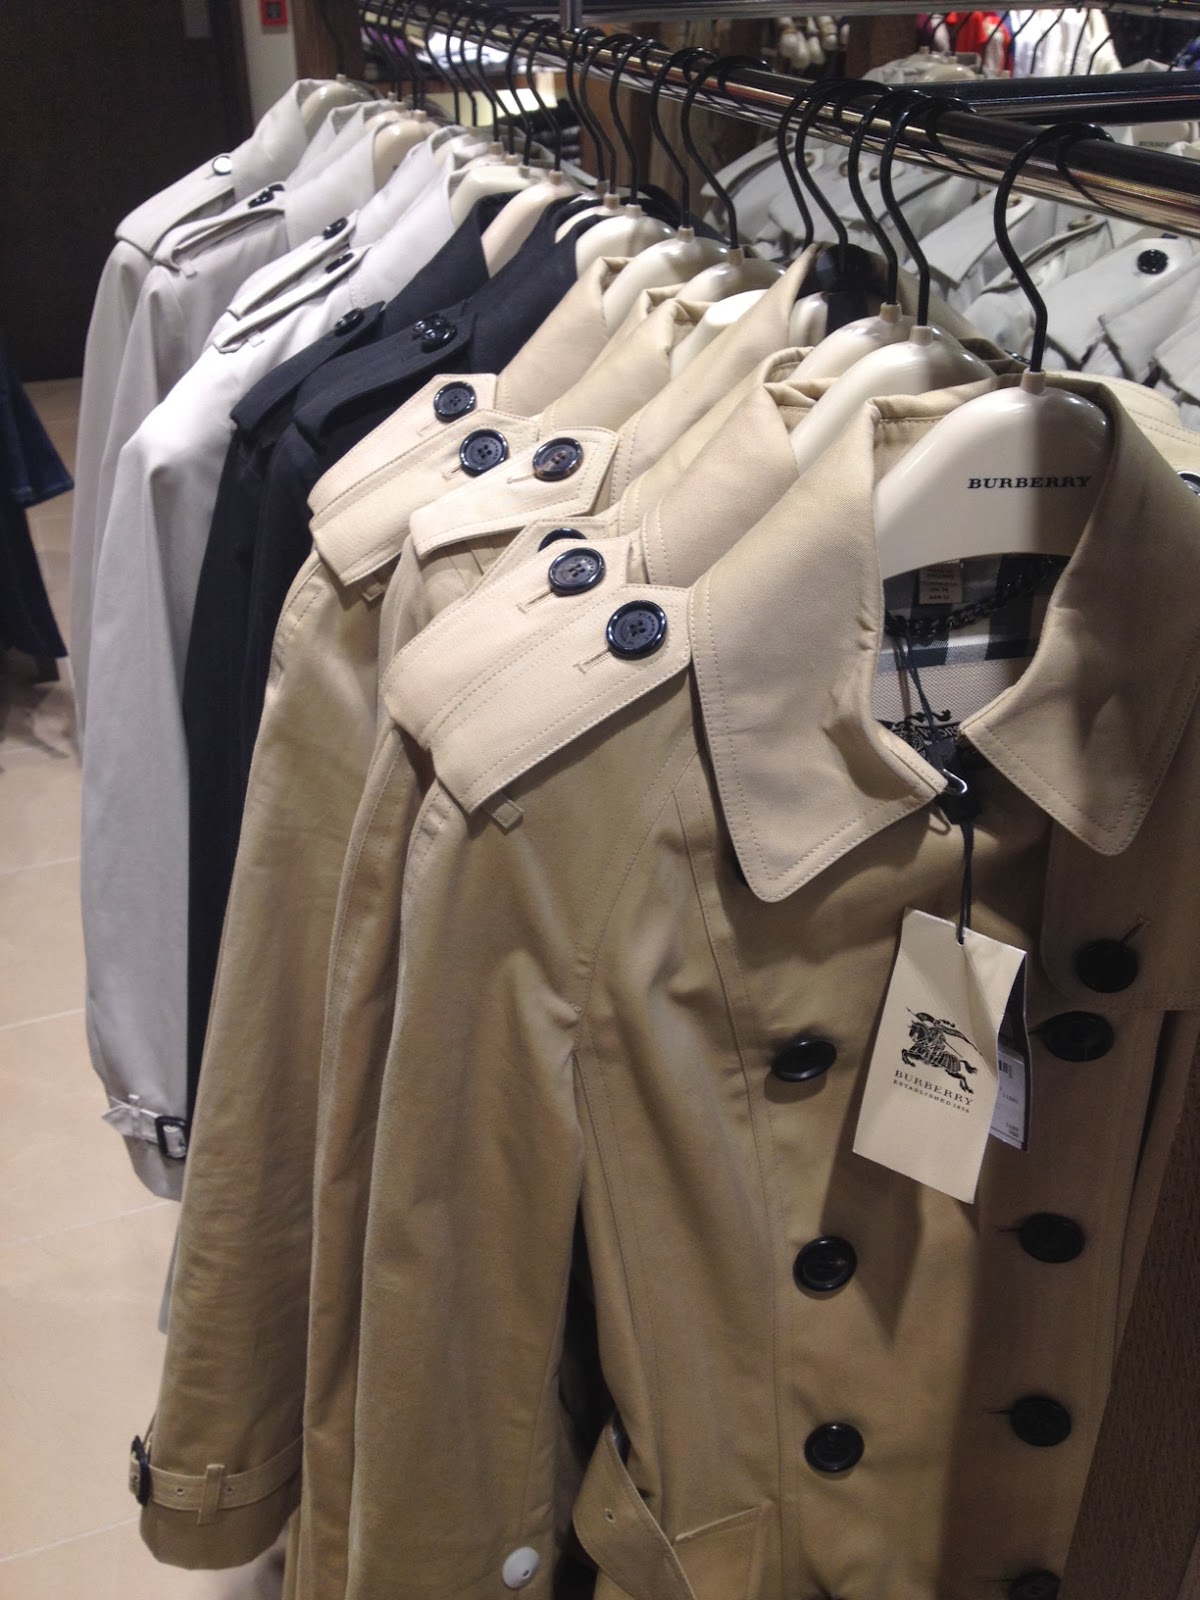 bicester village burberry trench price